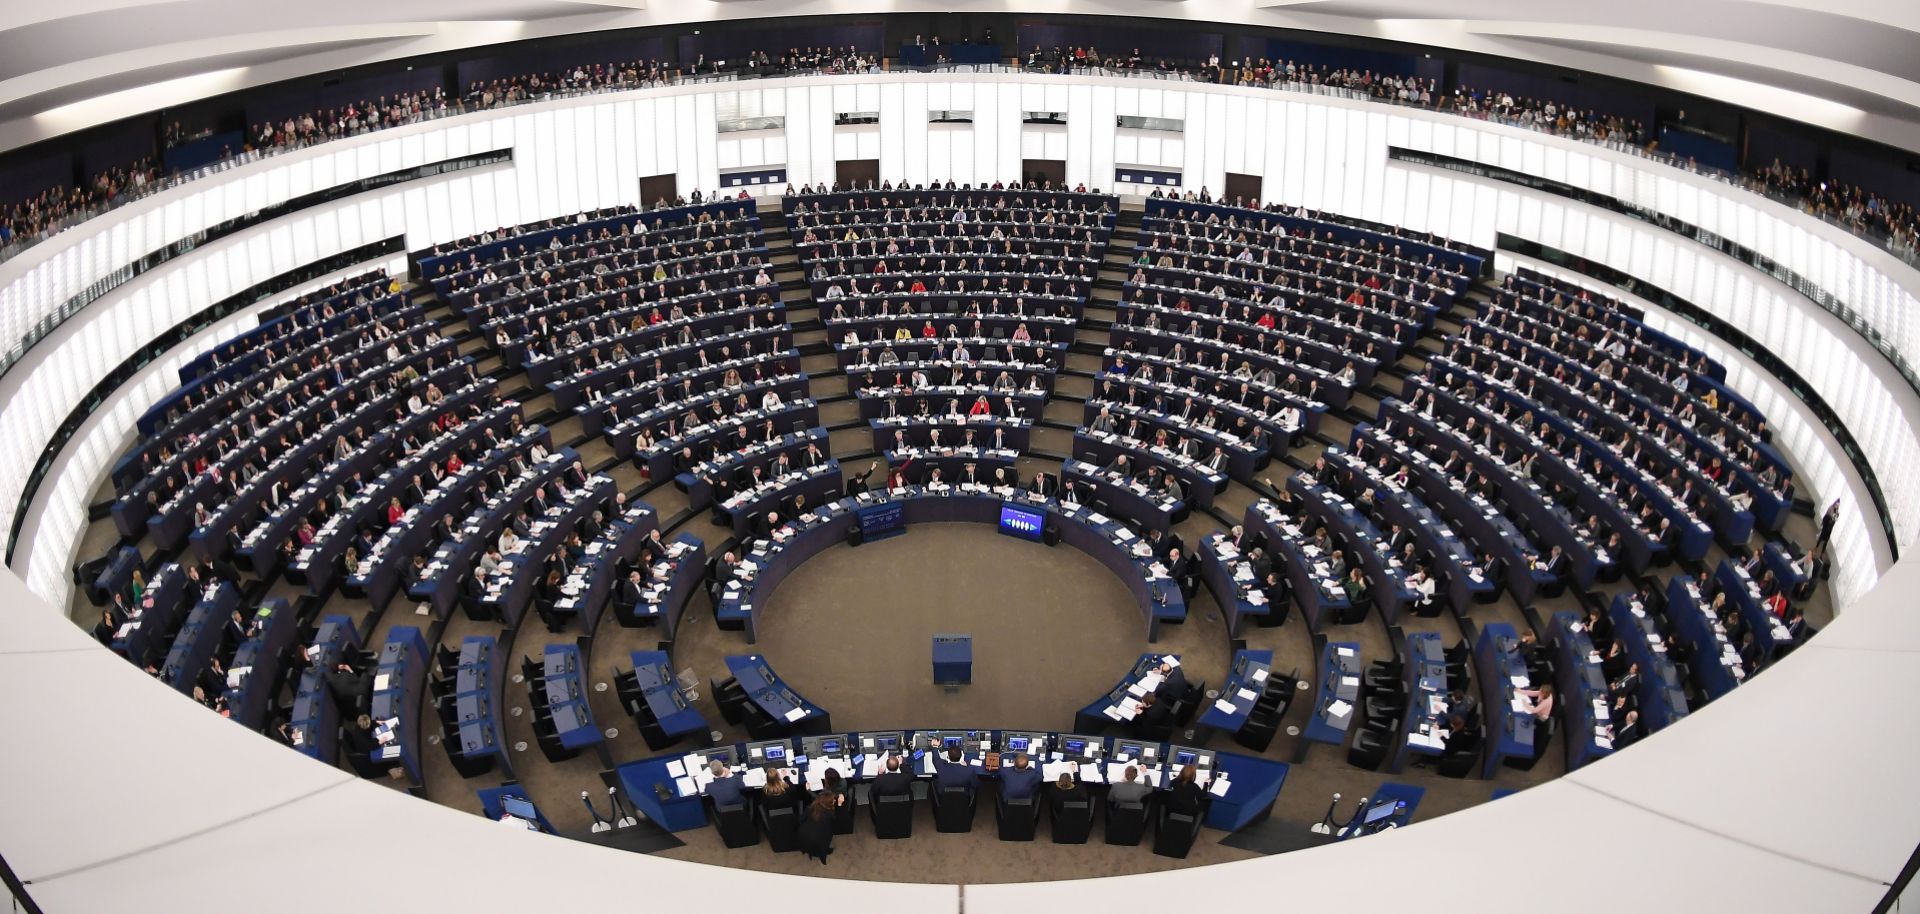 Members of the European Parliament vote during a plenary session at the European Parliament on Dec. 11, 2018, in Strasbourg.